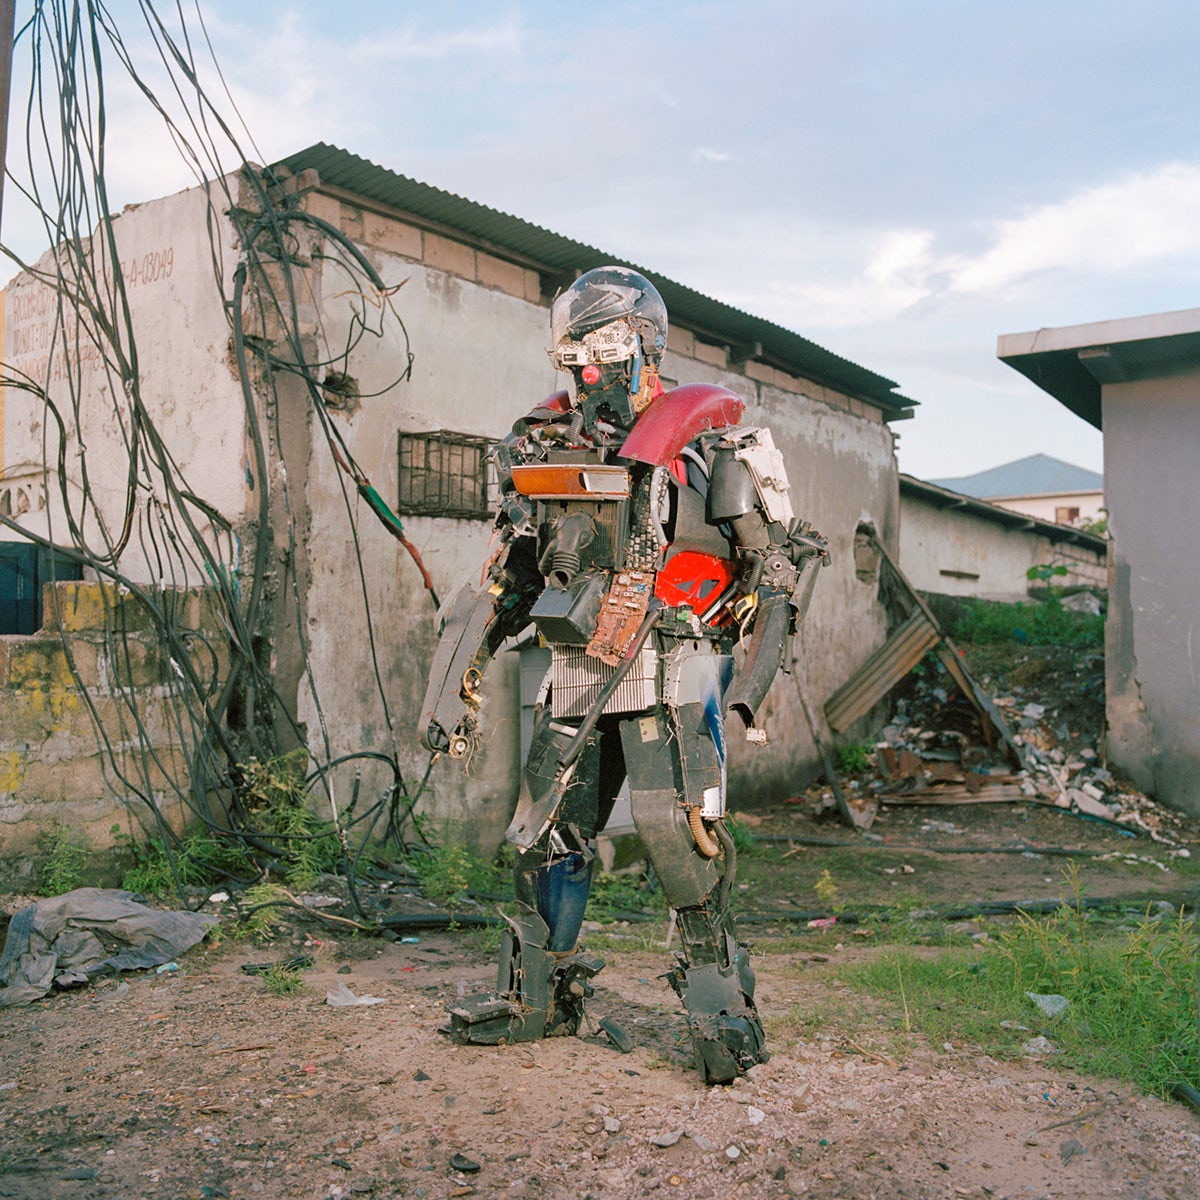 Photo by Colin Delfosse showing a person wearing a costume made out of waste, standing in a yard in front of two low buildings